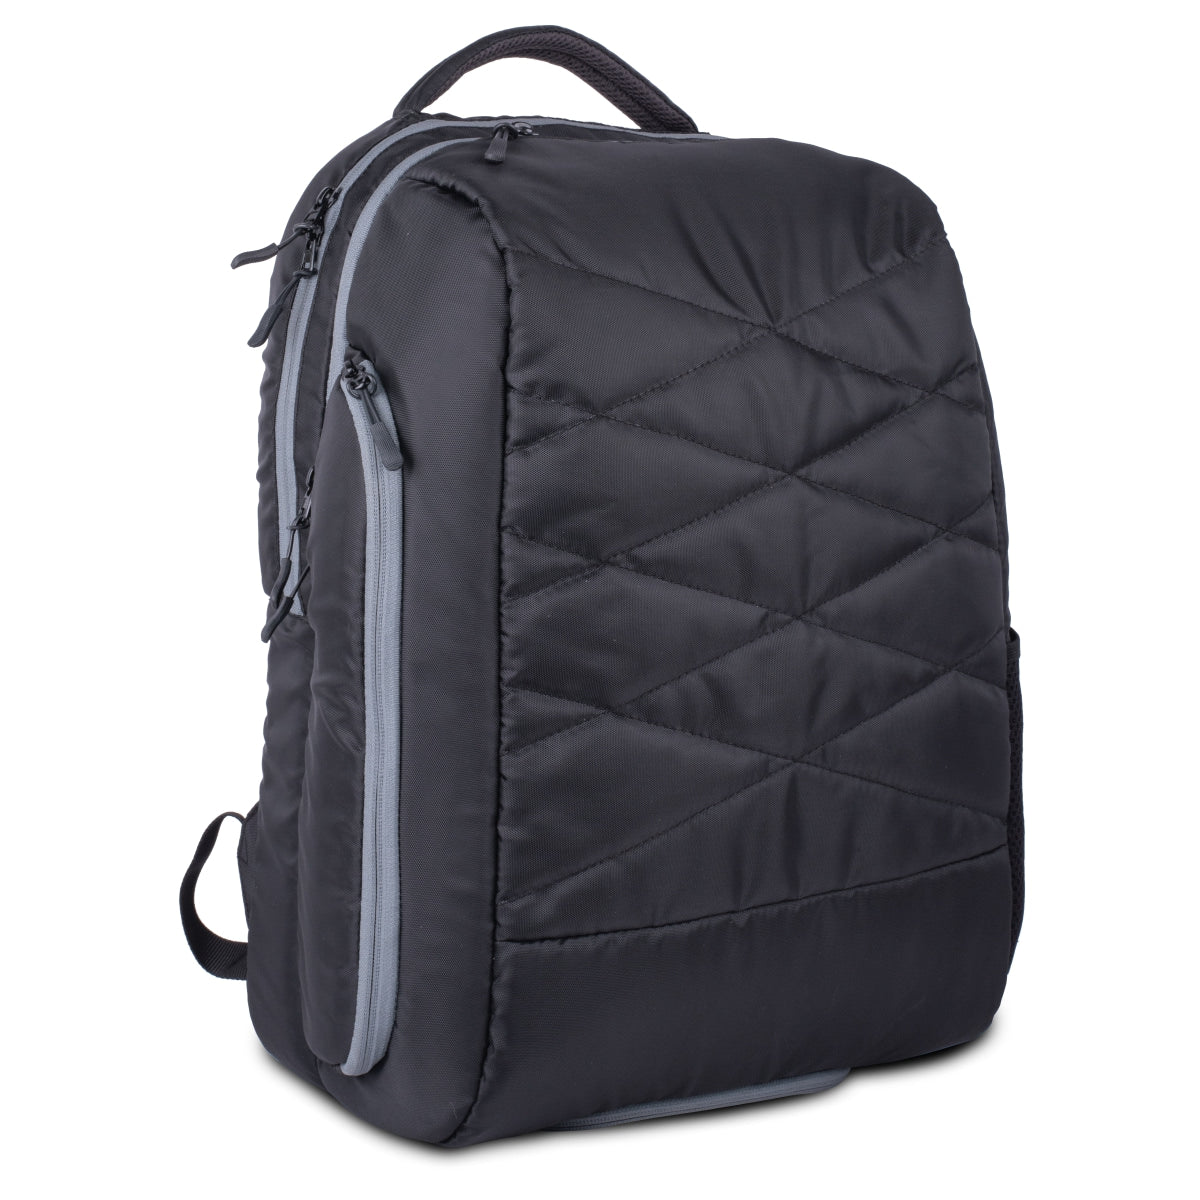 Multipurpose Black Executive Backpack - For Employees, Travelers, Corporate, Client or Dealer Gifting, Events Promotional Freebies BGS38